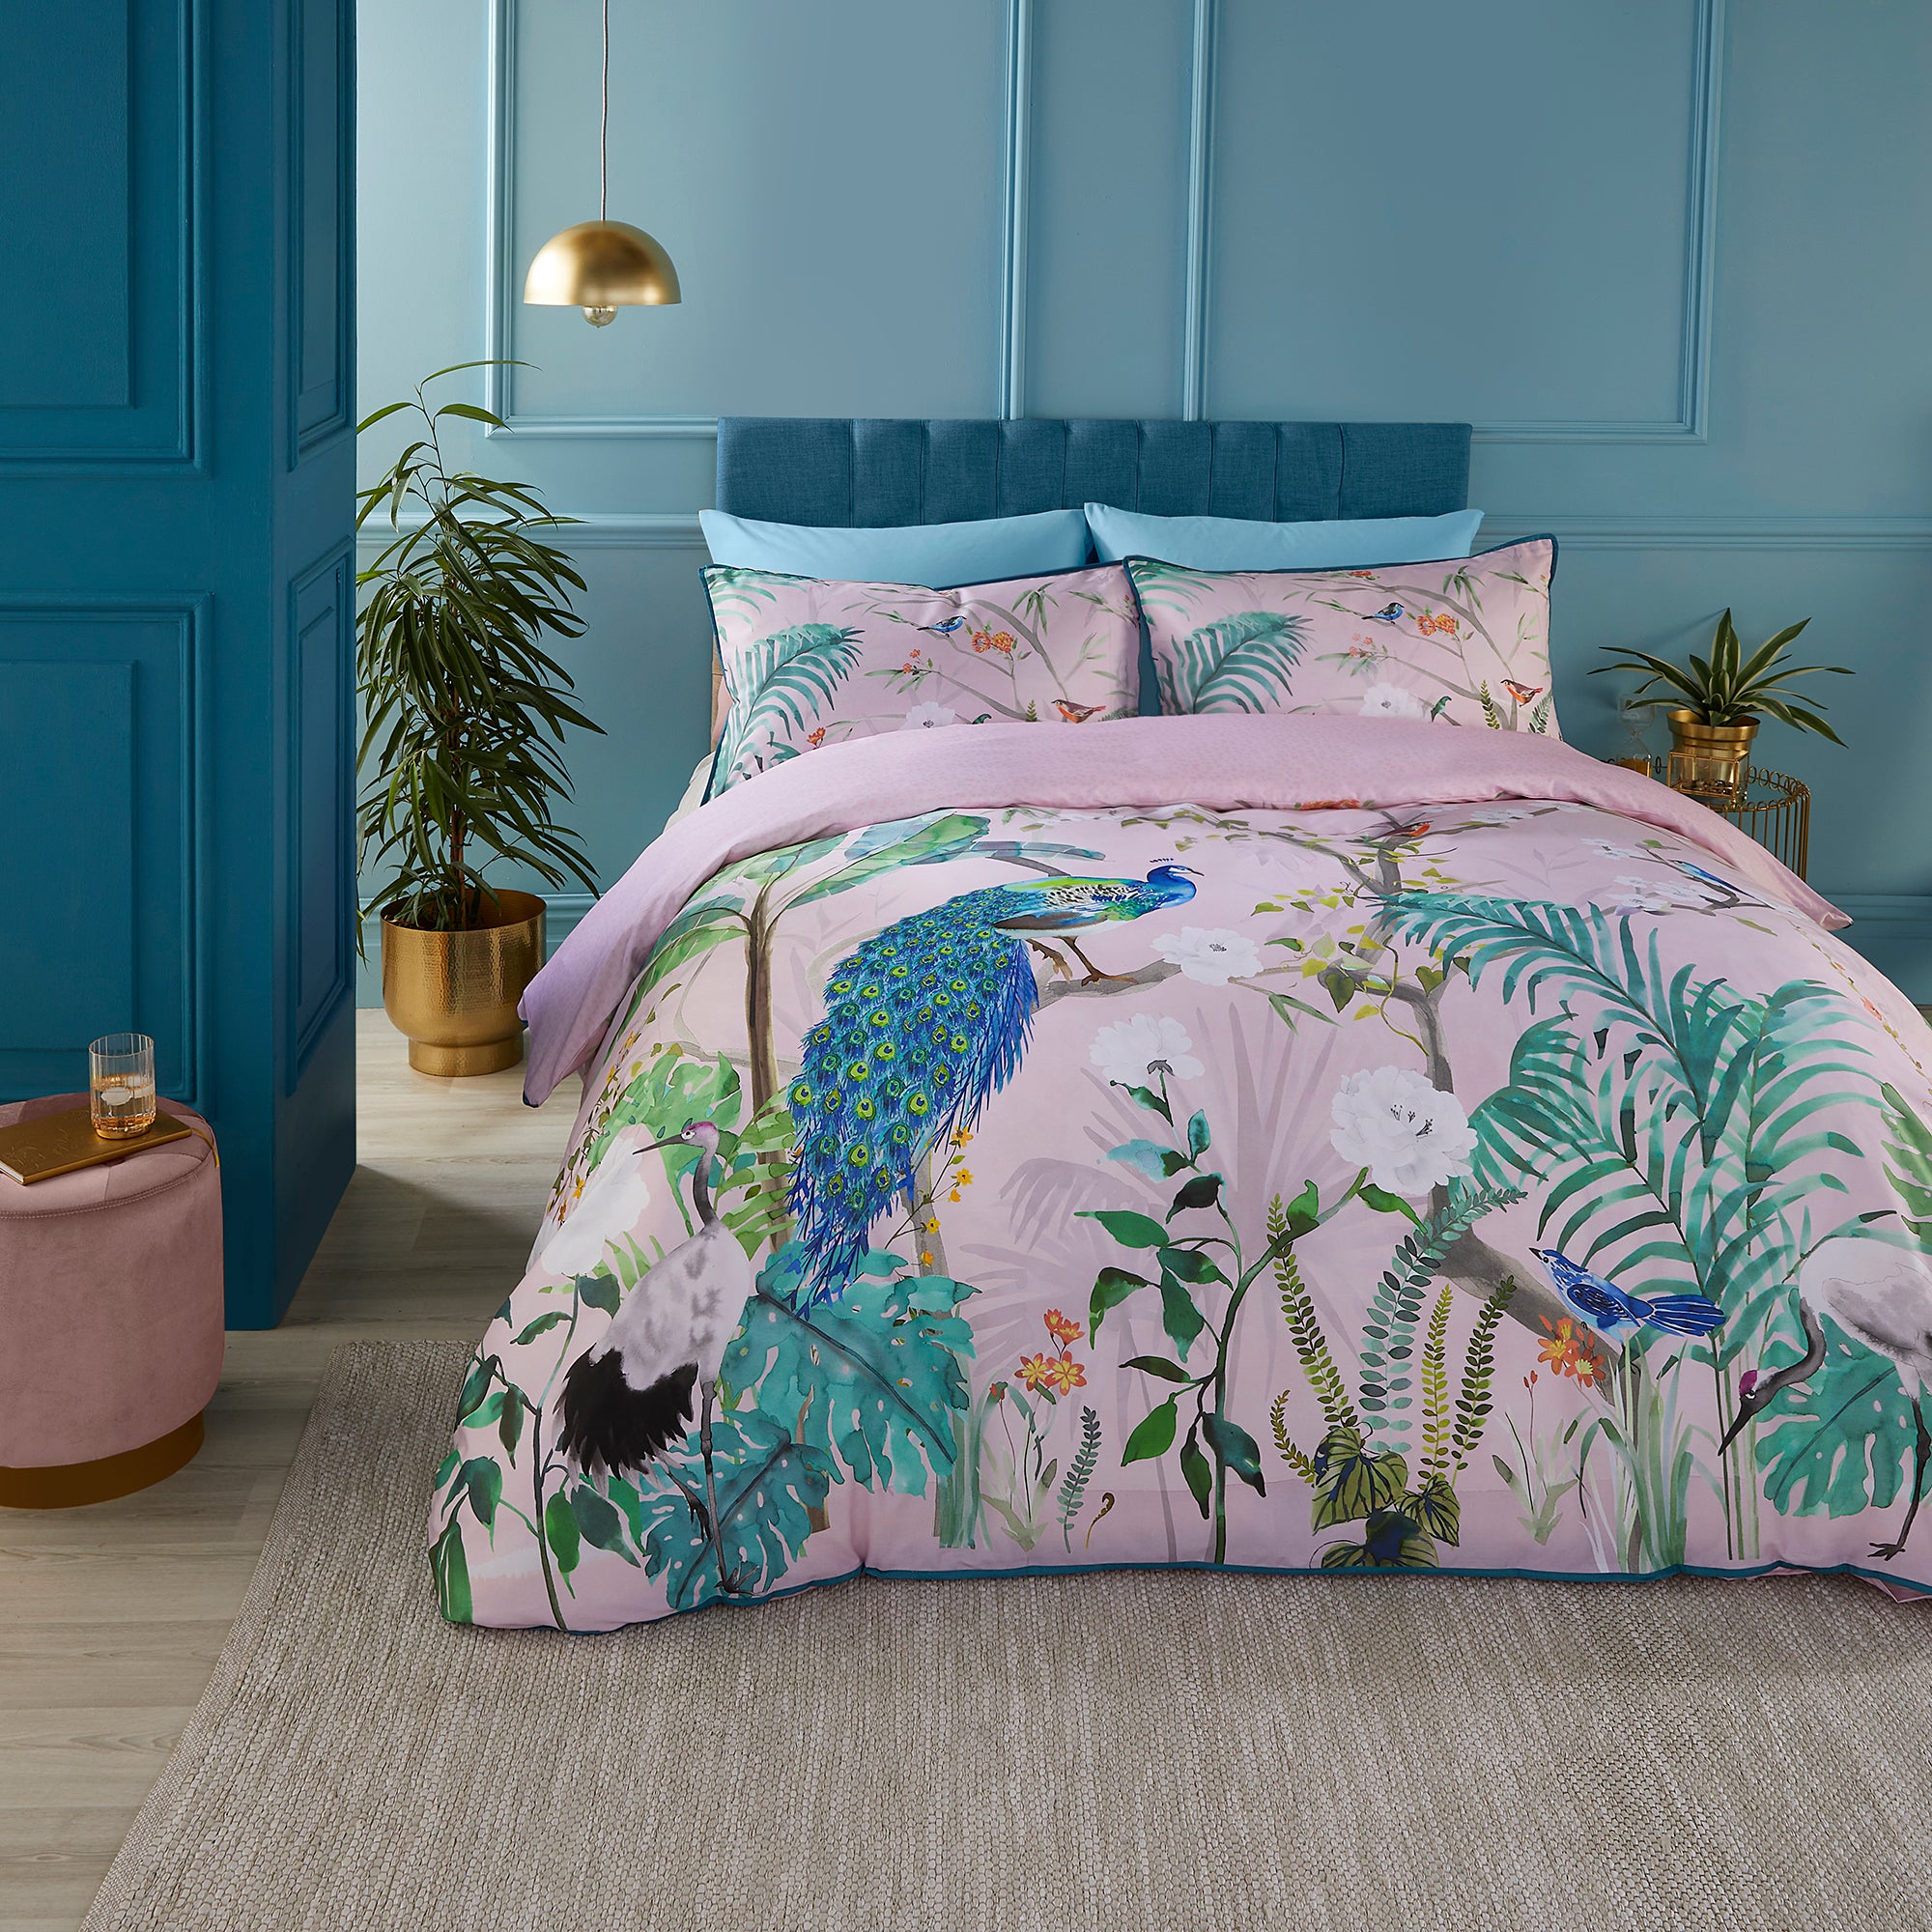 Soiree Peacock Jungle 200 Thread Count Cotton Duvet Cover and Pillowcase Set